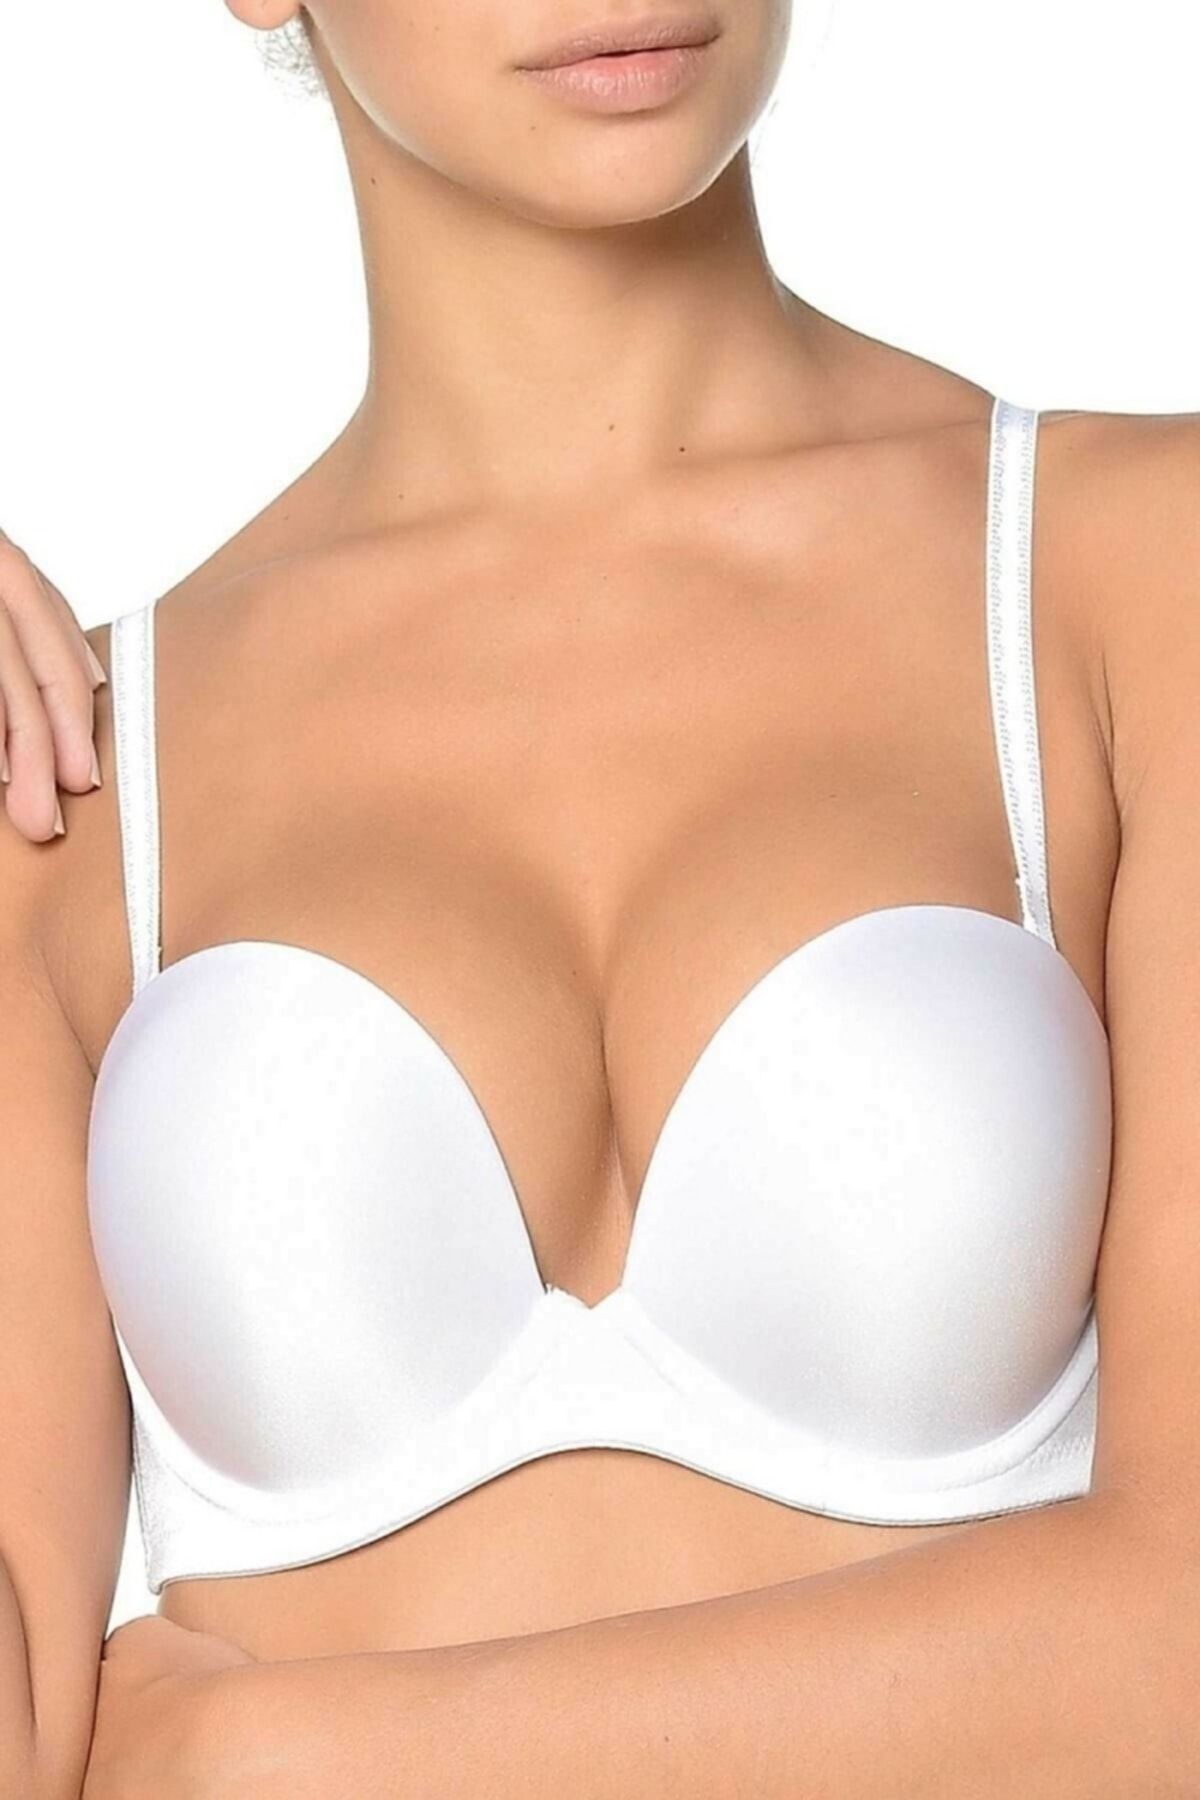 TREND CONSEPT Women's Cindy Double Padded Magic Bra that Increases 2 Sizes